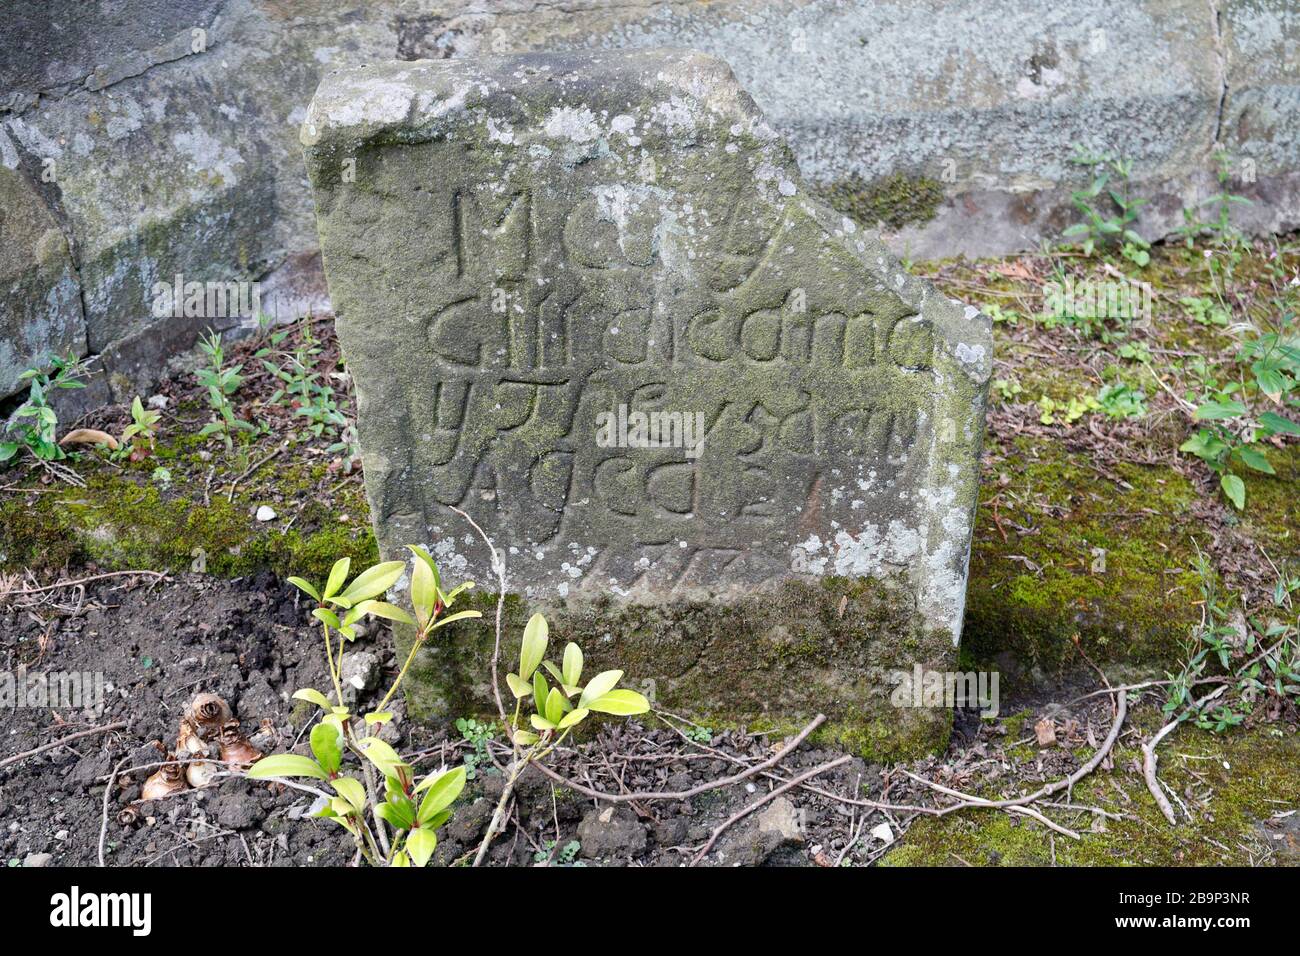 Grave stone memorial in St Helens church  Darley Dale, Derbyshire England UK Stock Photo